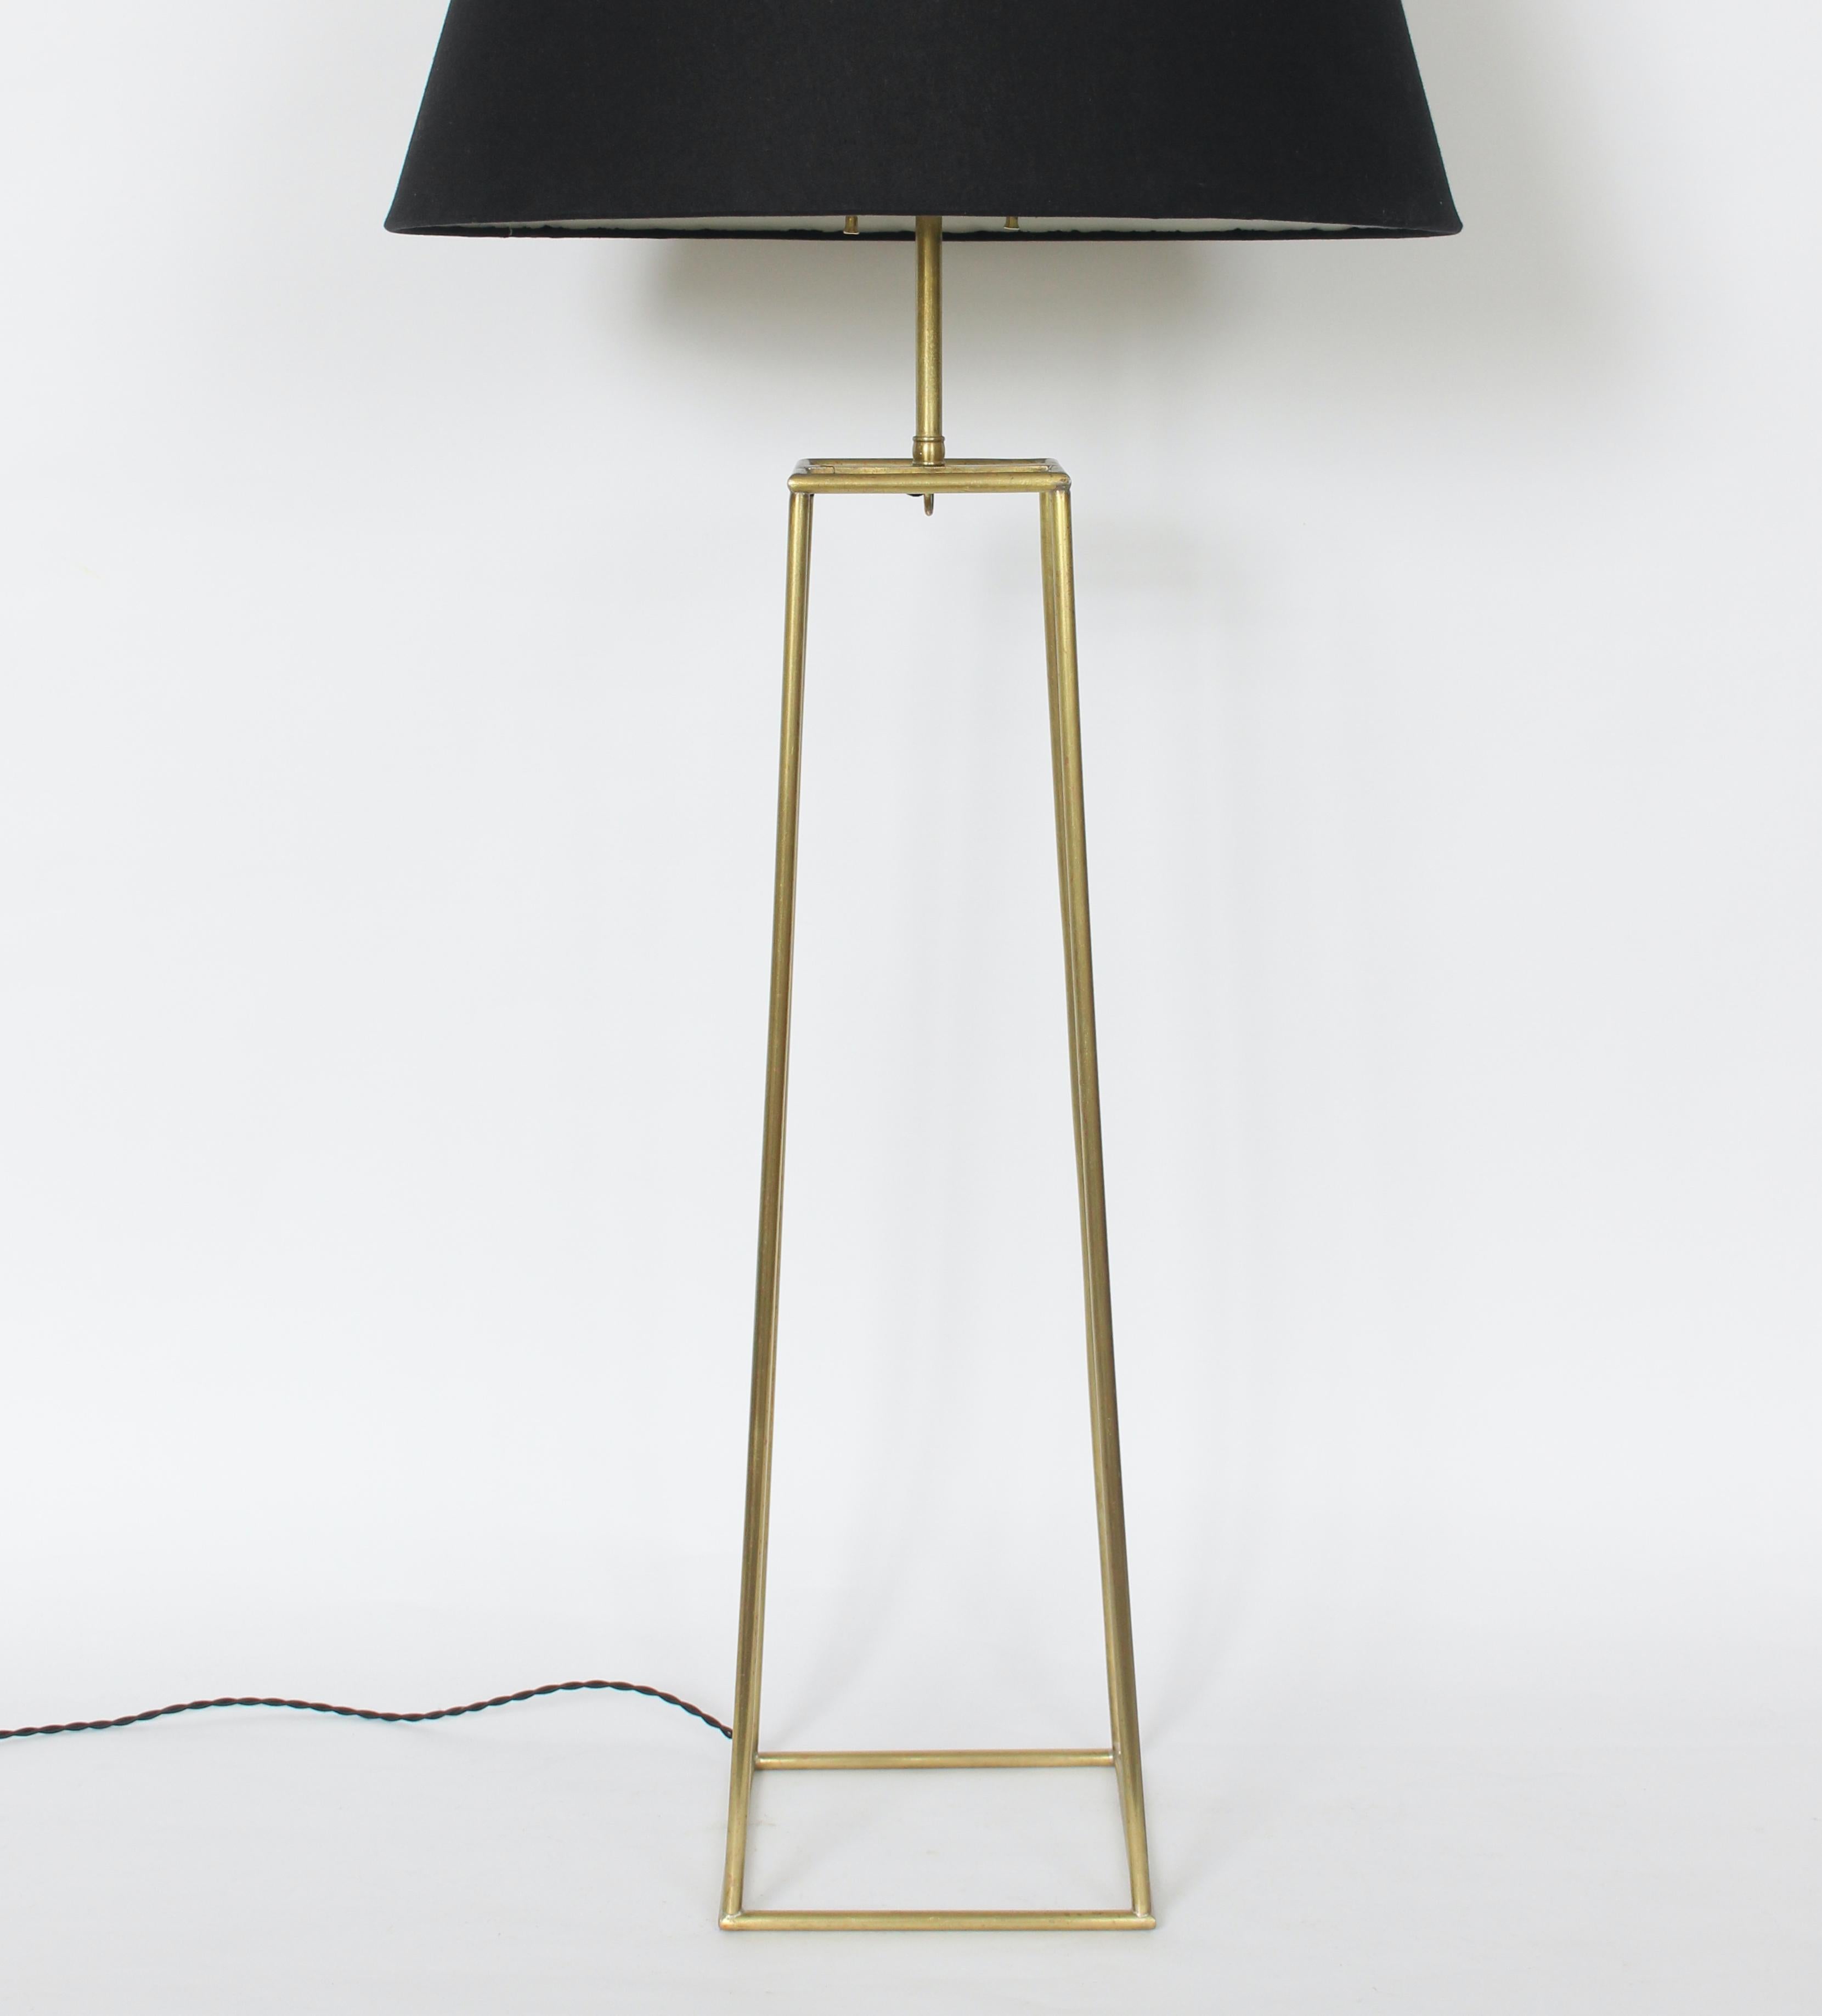 Substantial Tommi Parzinger Style Brass Open Box Form Table Lamp, 1950s In Good Condition For Sale In Bainbridge, NY